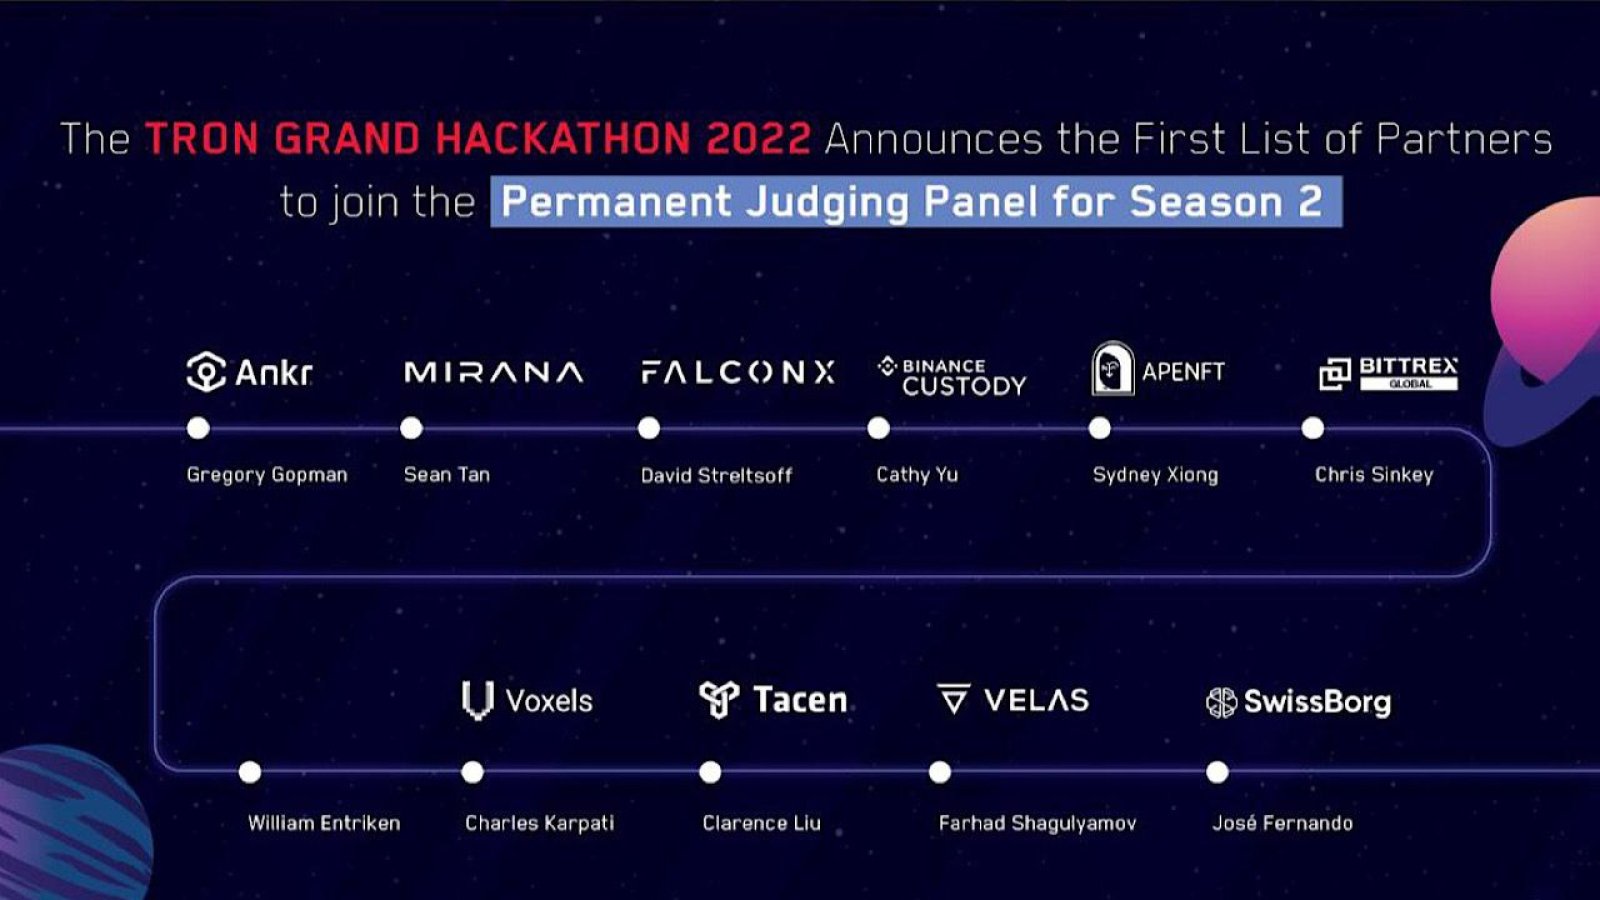 The TRON Grand Hackathon 2022 Announces First List of New Partners Joining the  Permanent Judging Panel for Season 2